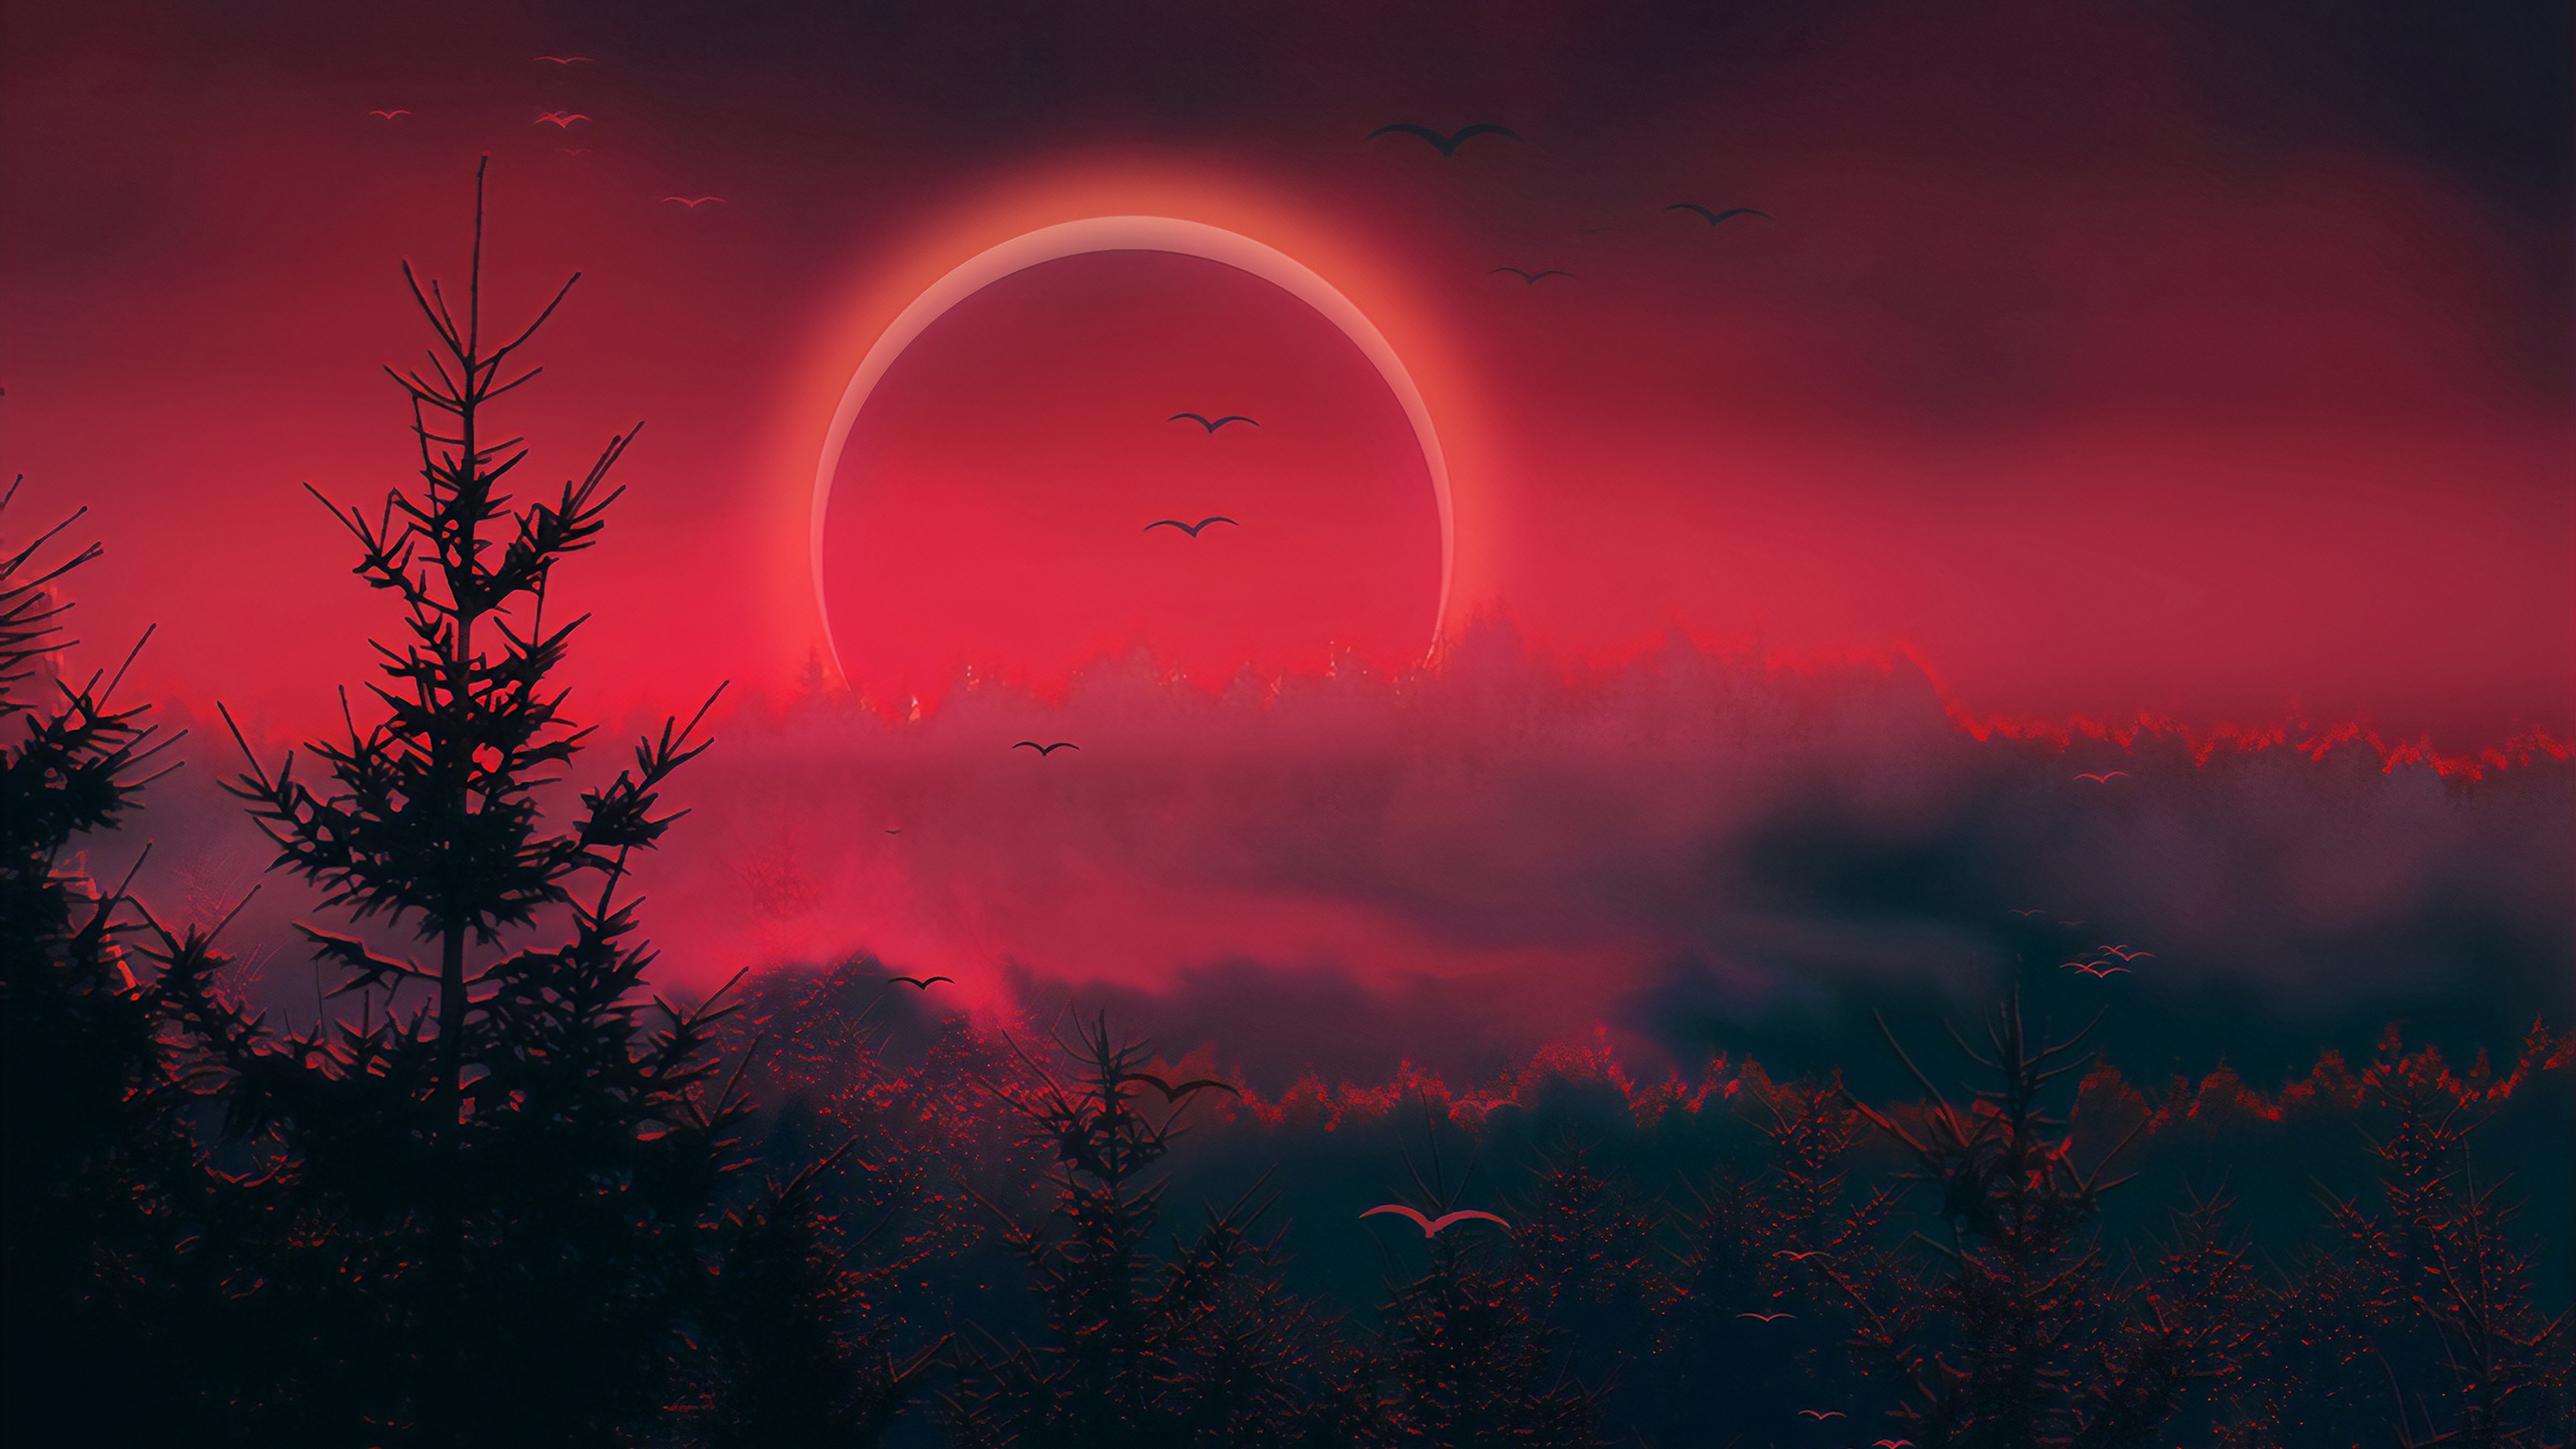 Final Eclipse Wallpapers